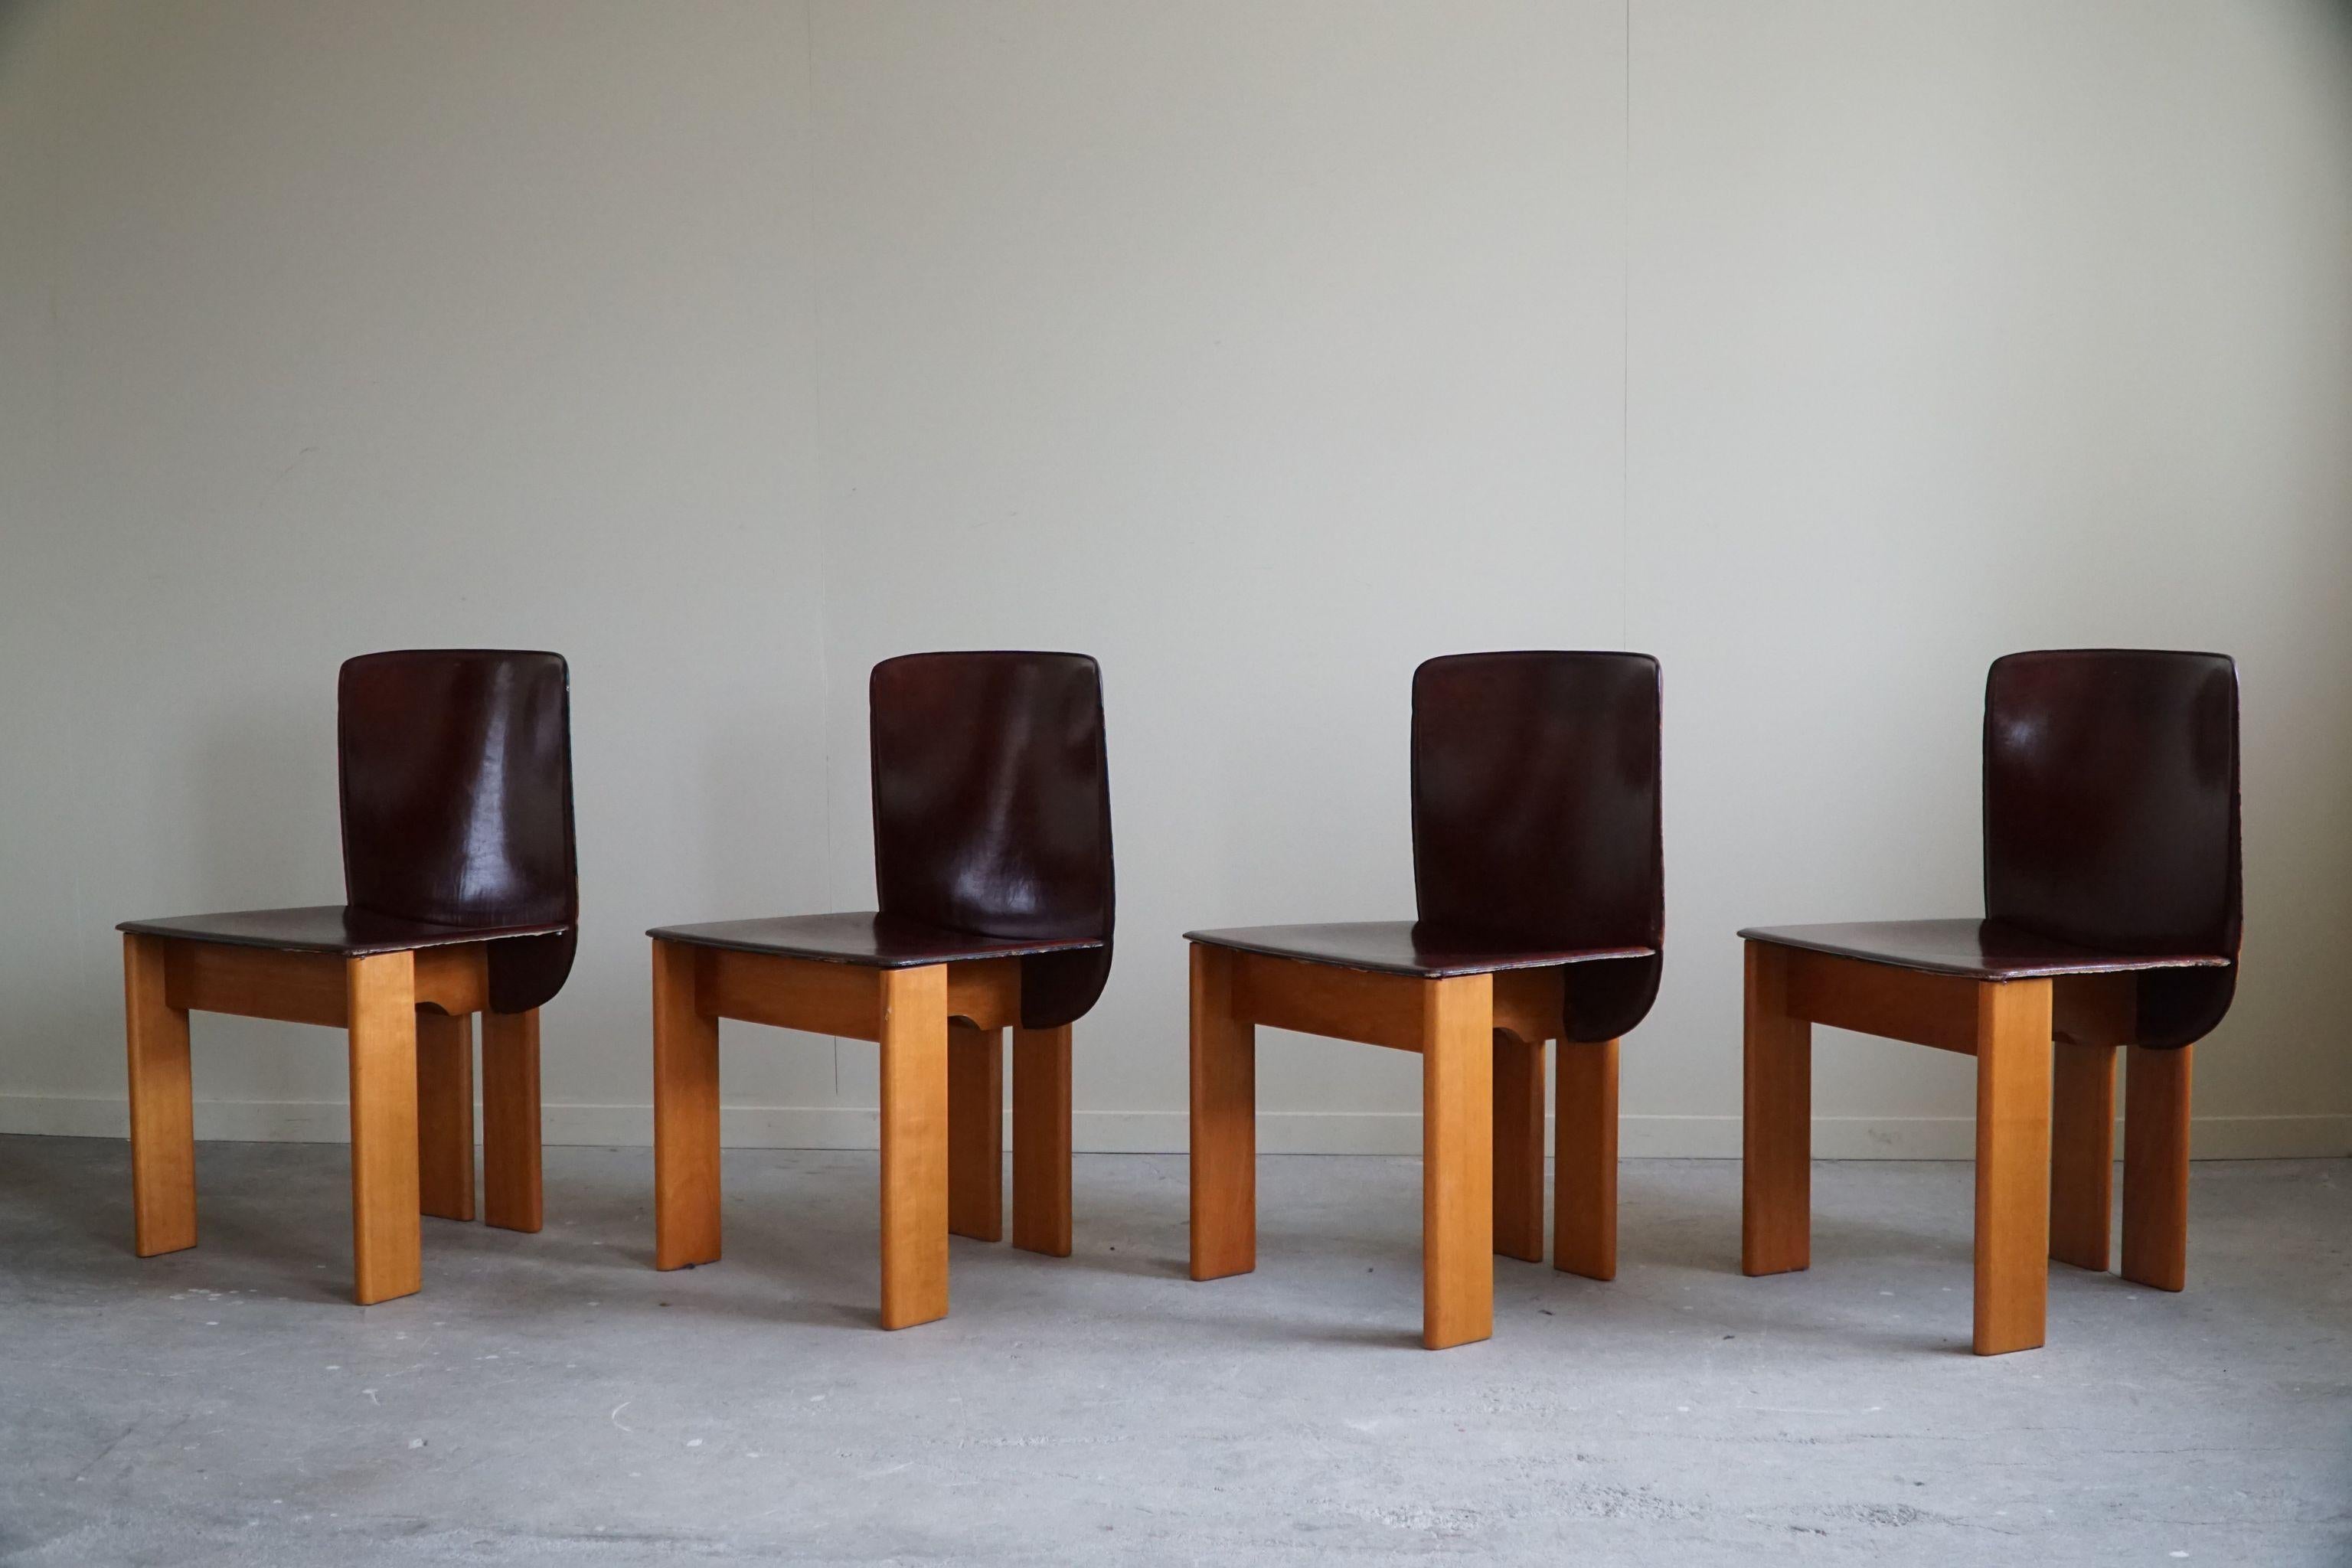 Italian Mid Century Modern, Set of 4 Leather Chairs, Tobia Scarpa Style, 1960s For Sale 7